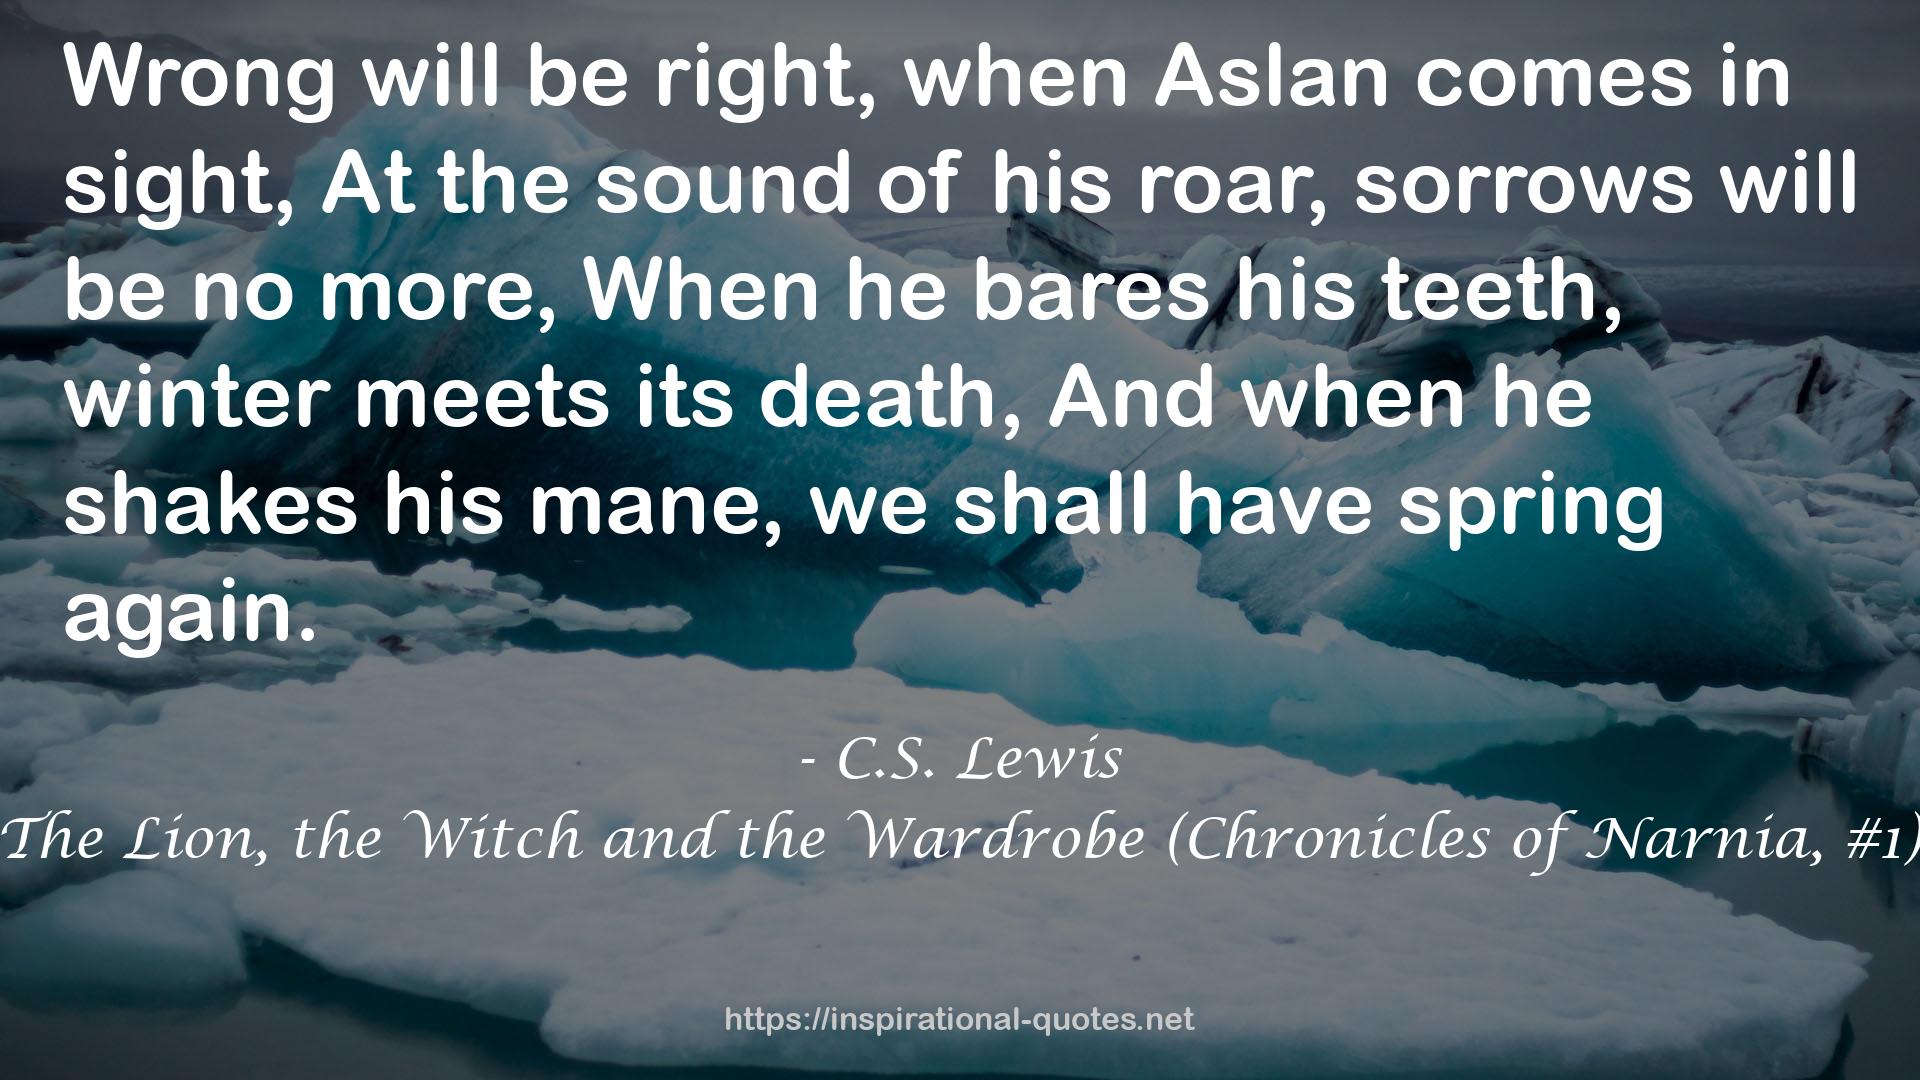 The Lion, the Witch and the Wardrobe (Chronicles of Narnia, #1) QUOTES